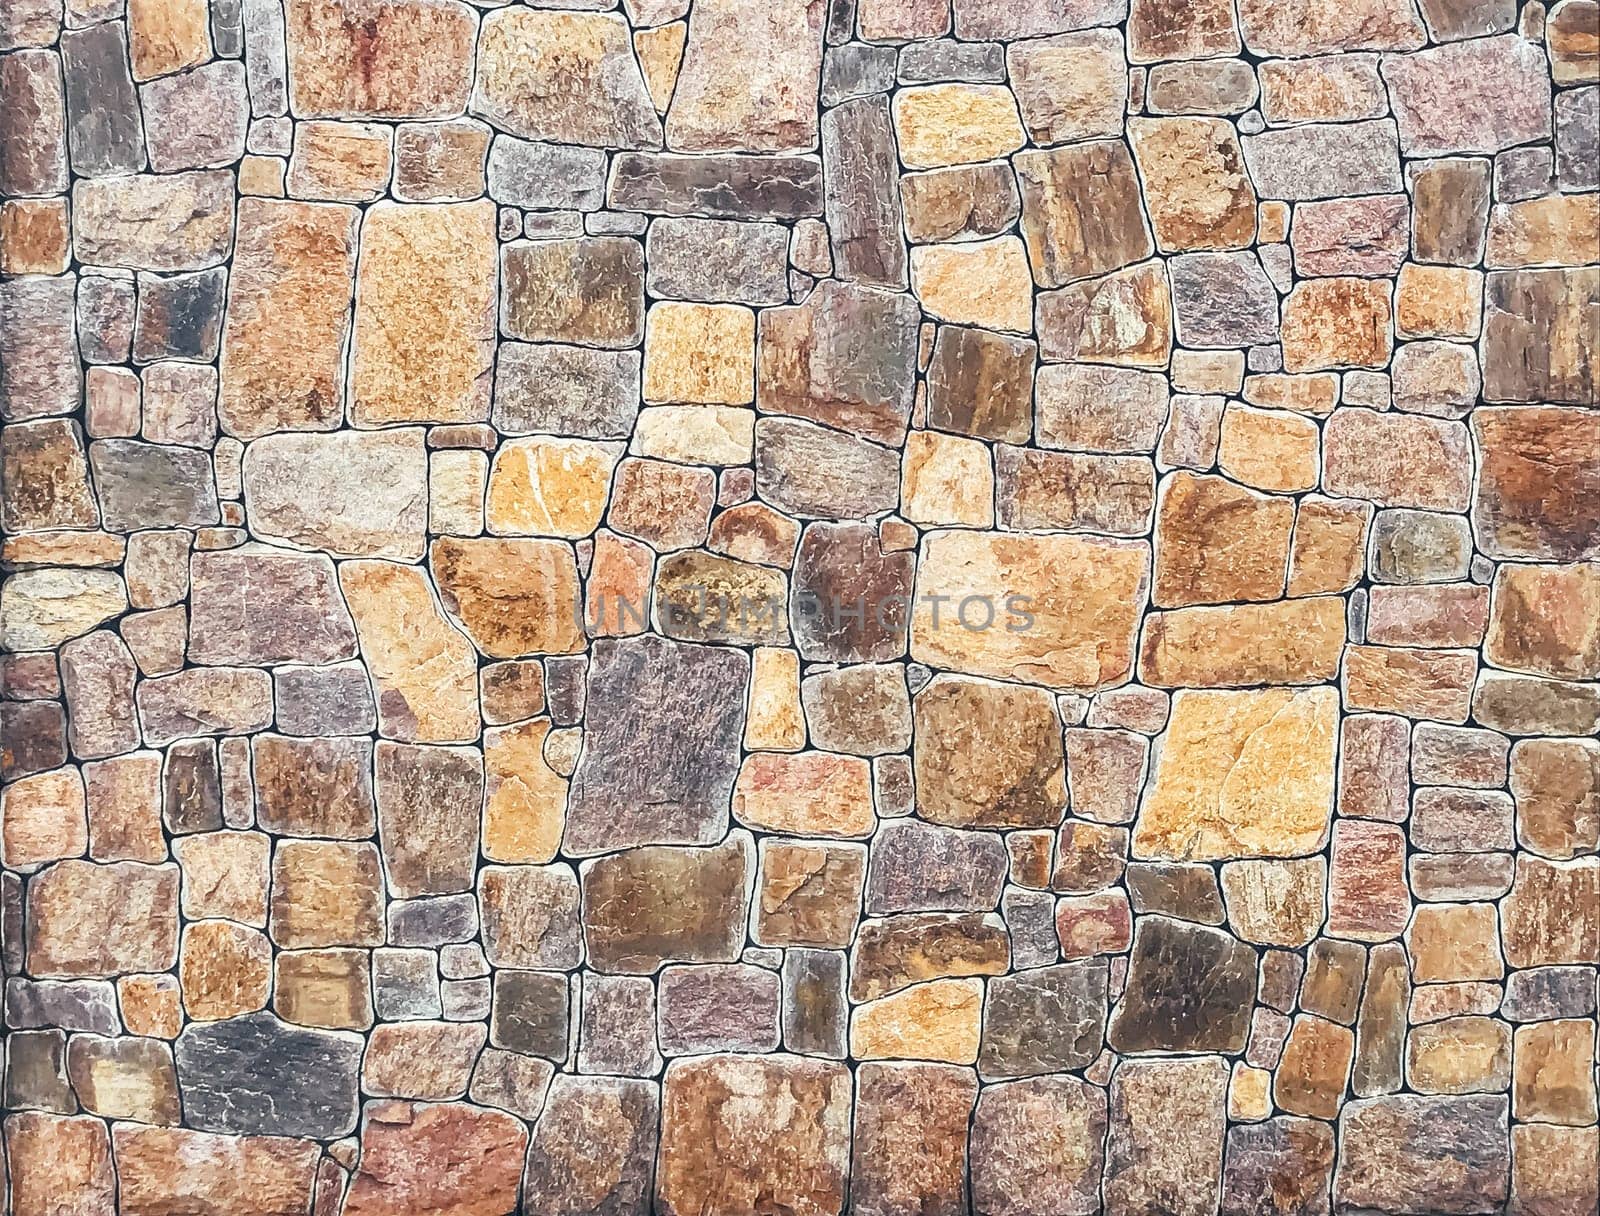 A wall made of stone blocks with a brown and tan color. The wall is very large and has a rough texture